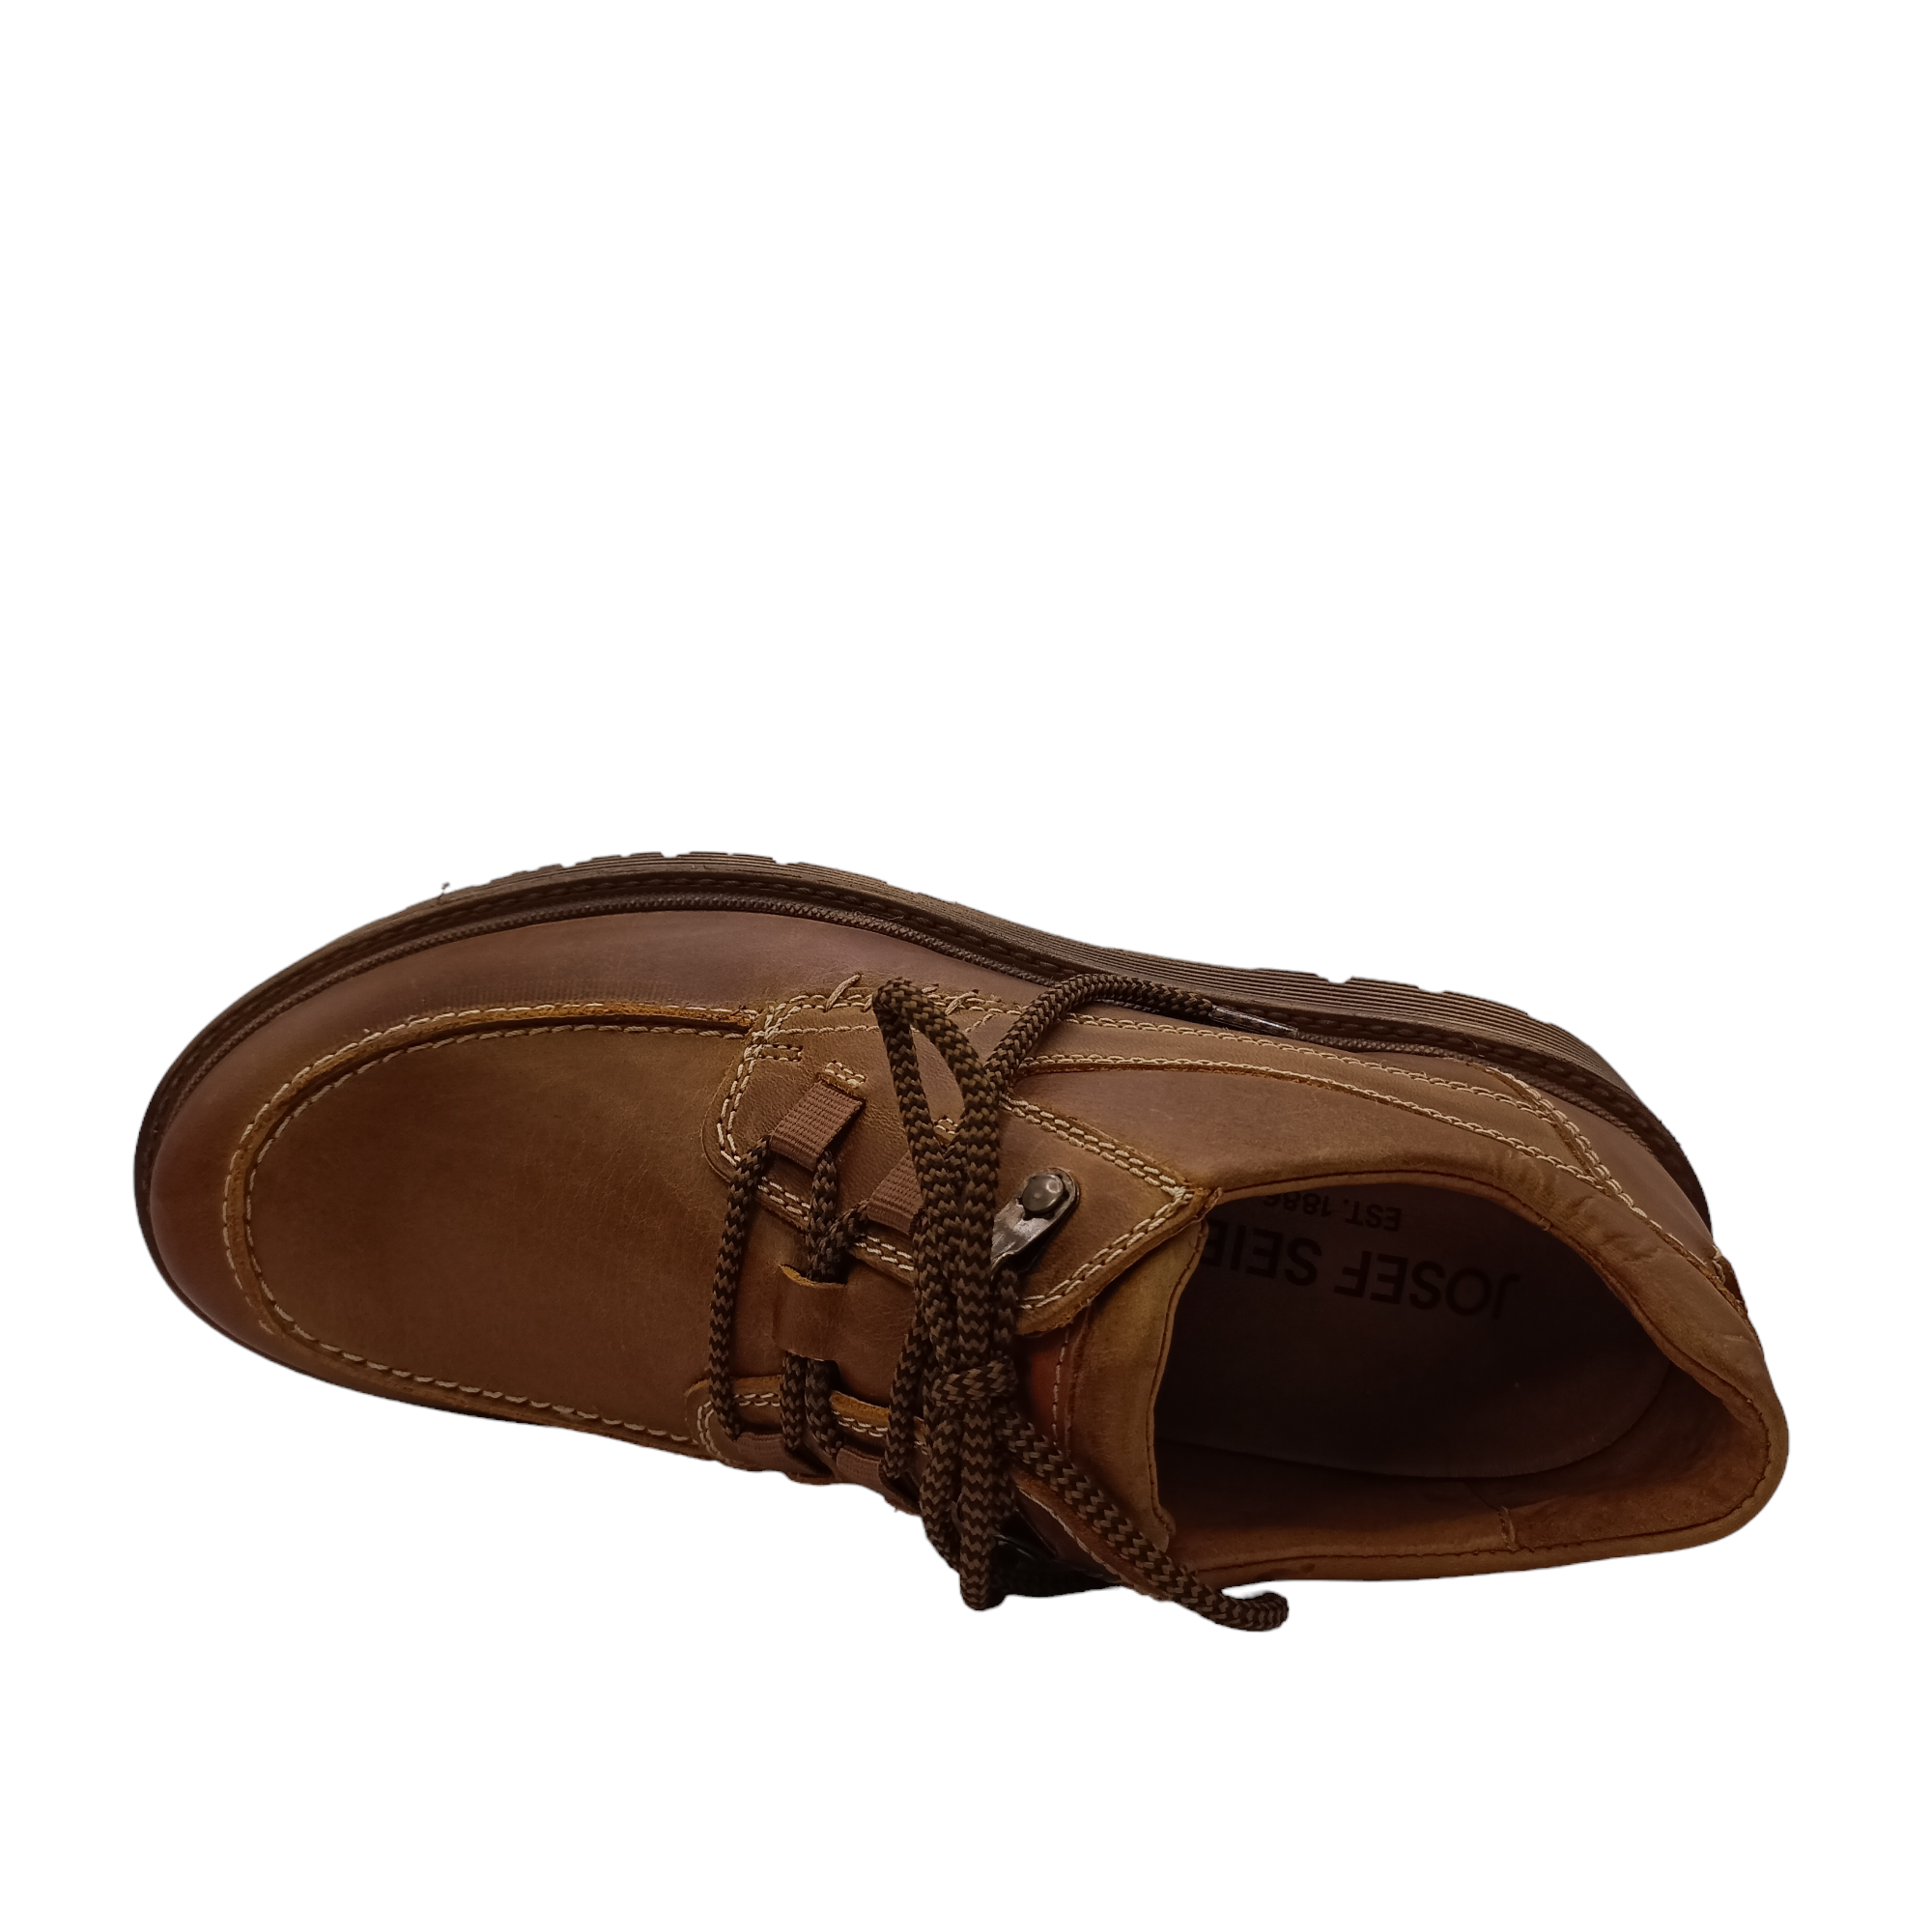 Shop Cooper 06 Josef Seibel - with shoe&me - from Josef Seibel - Shoes - Mens, Shoe, Winter - [collection]